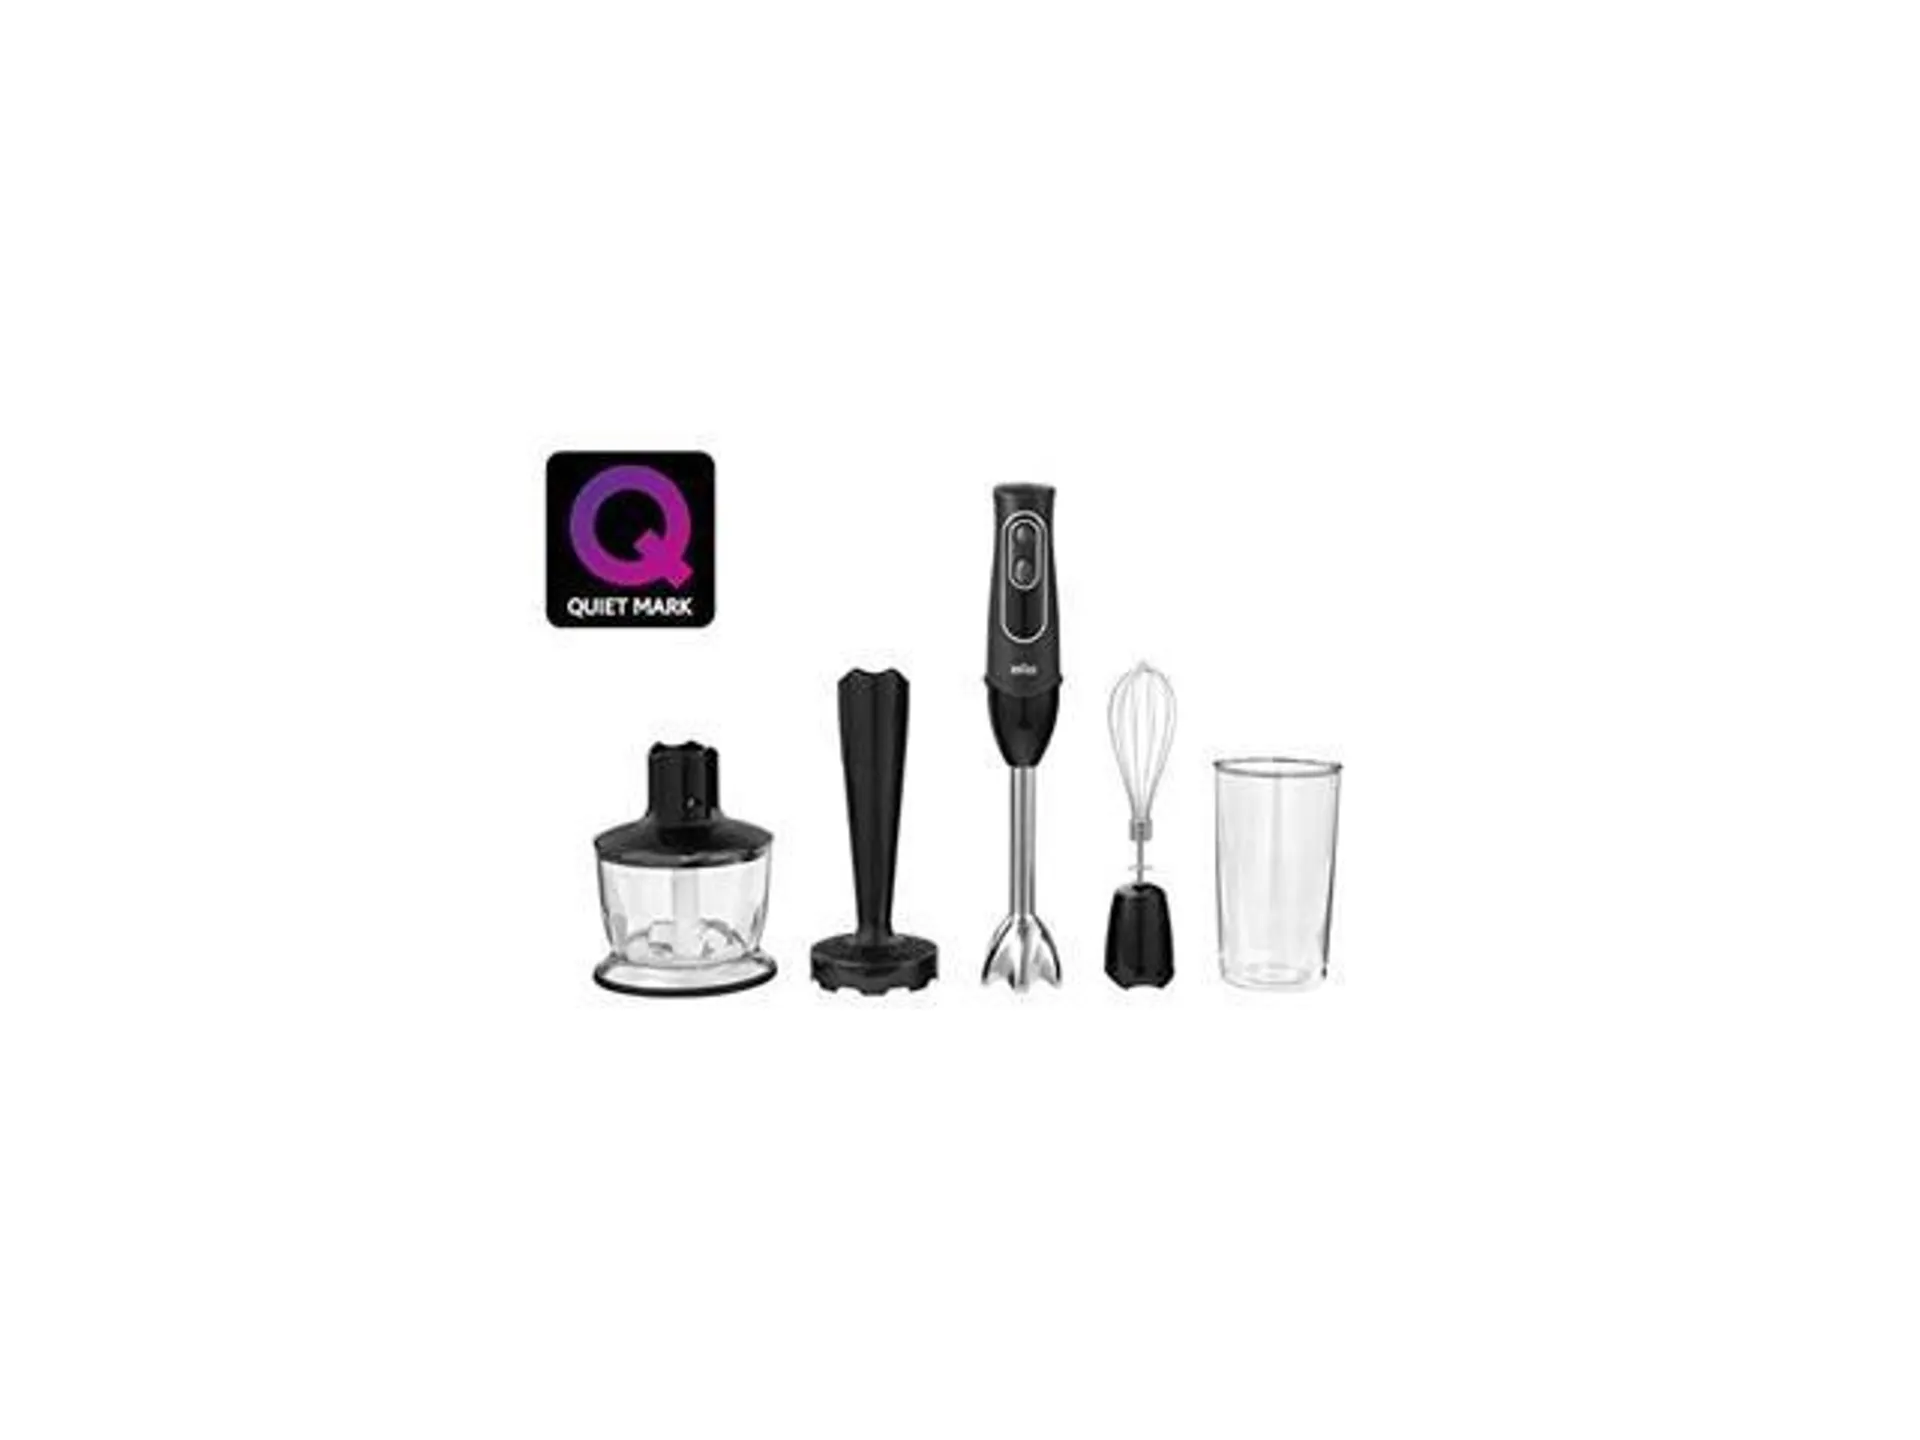 4-in-1 Immersion Hand Blender, Powerful 350W Stainless Steel Stick Blender, Multi-Speed + 2-Cup Food Processor, Whisk, Beaker, Masher,, Easy to Clean, Black, MultiQuick MQ537BK